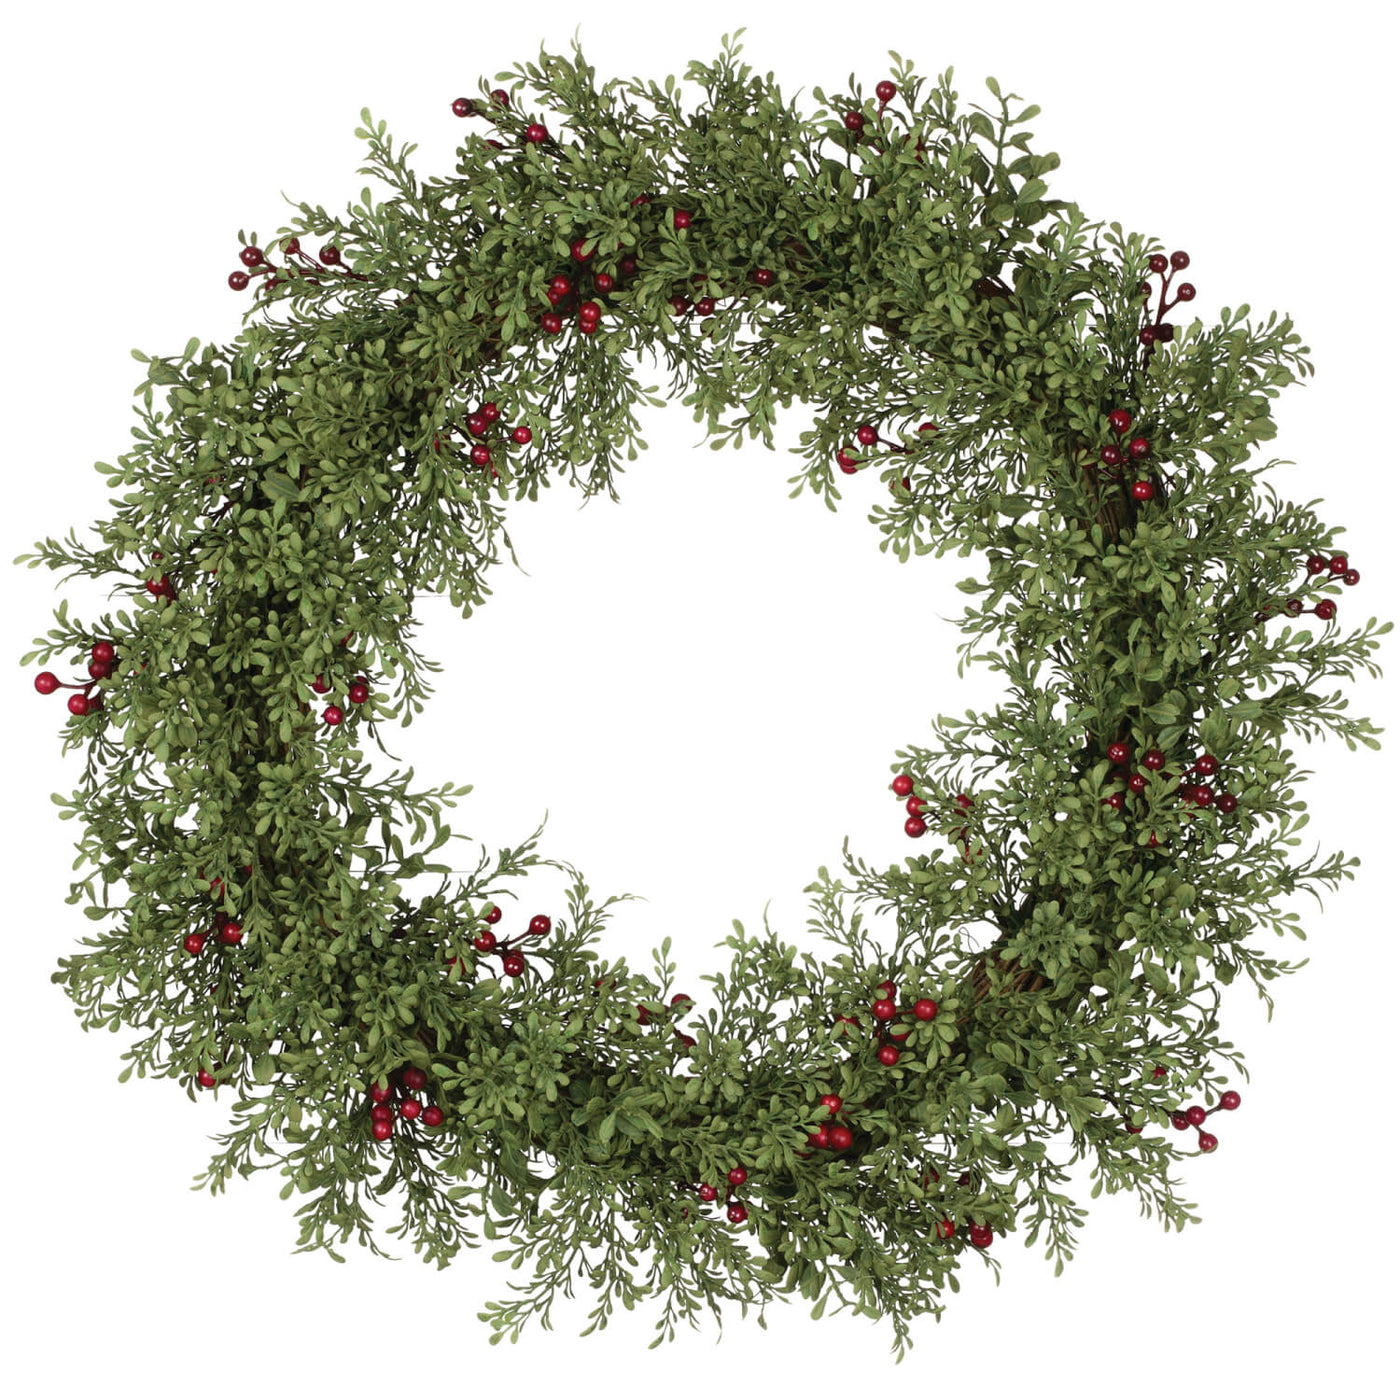 Twig wreath with mini leaves and red berries